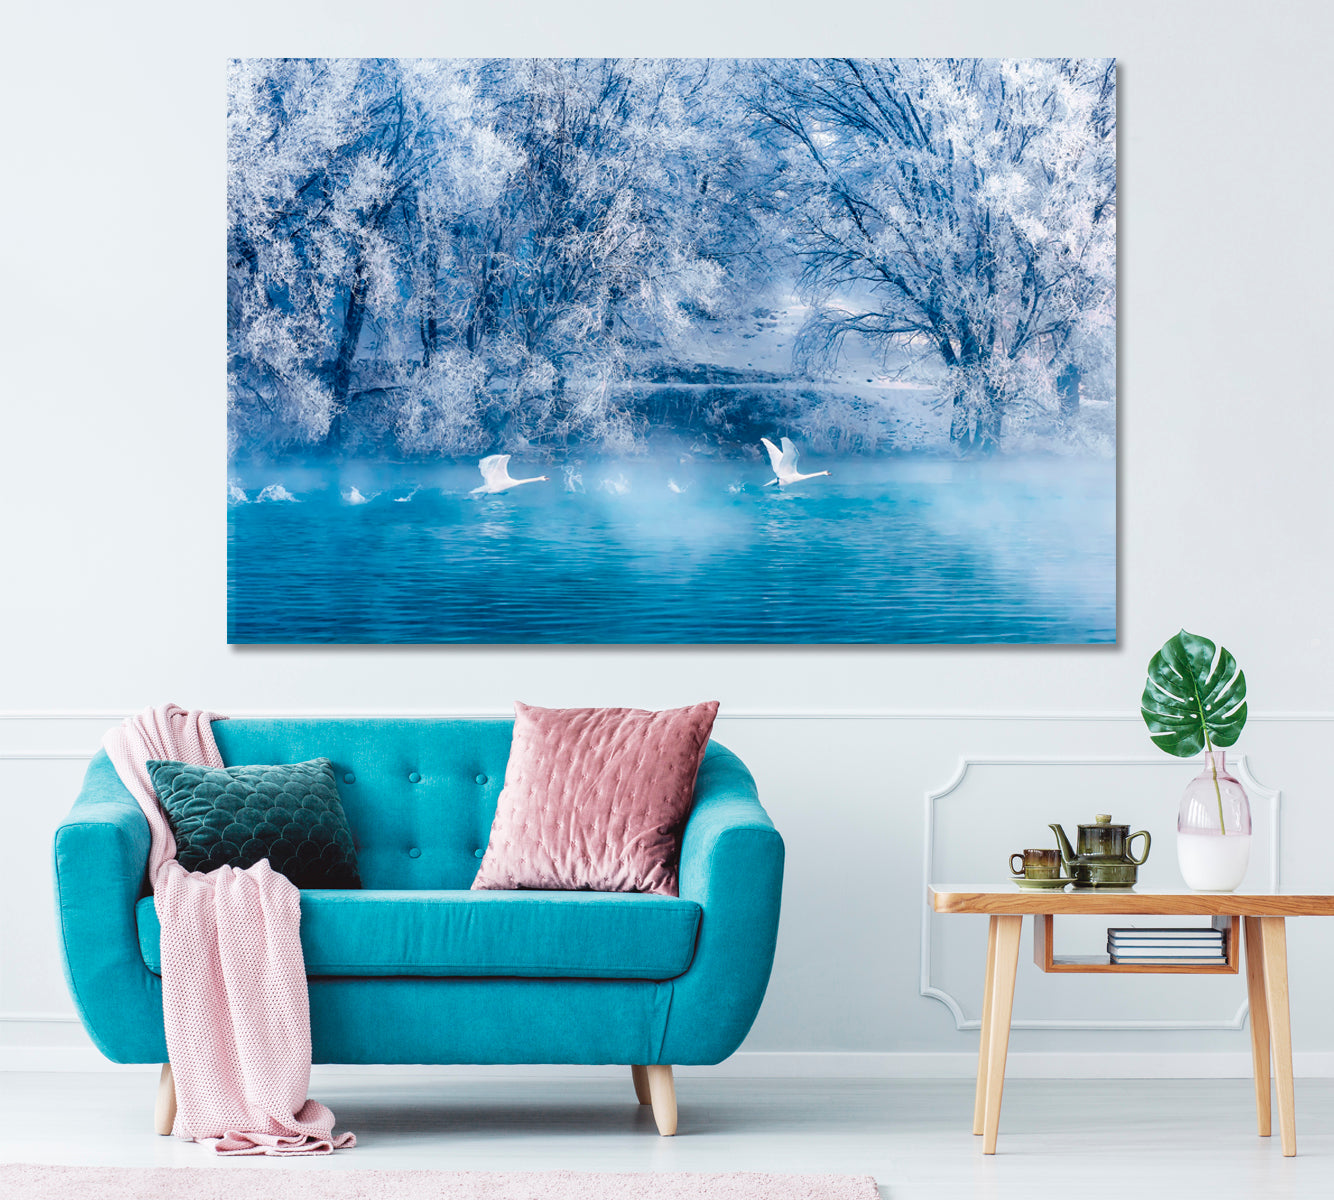 Beautiful Winter Landscape with Swans on Lake Canvas Print ArtLexy 1 Panel 24"x16" inches 